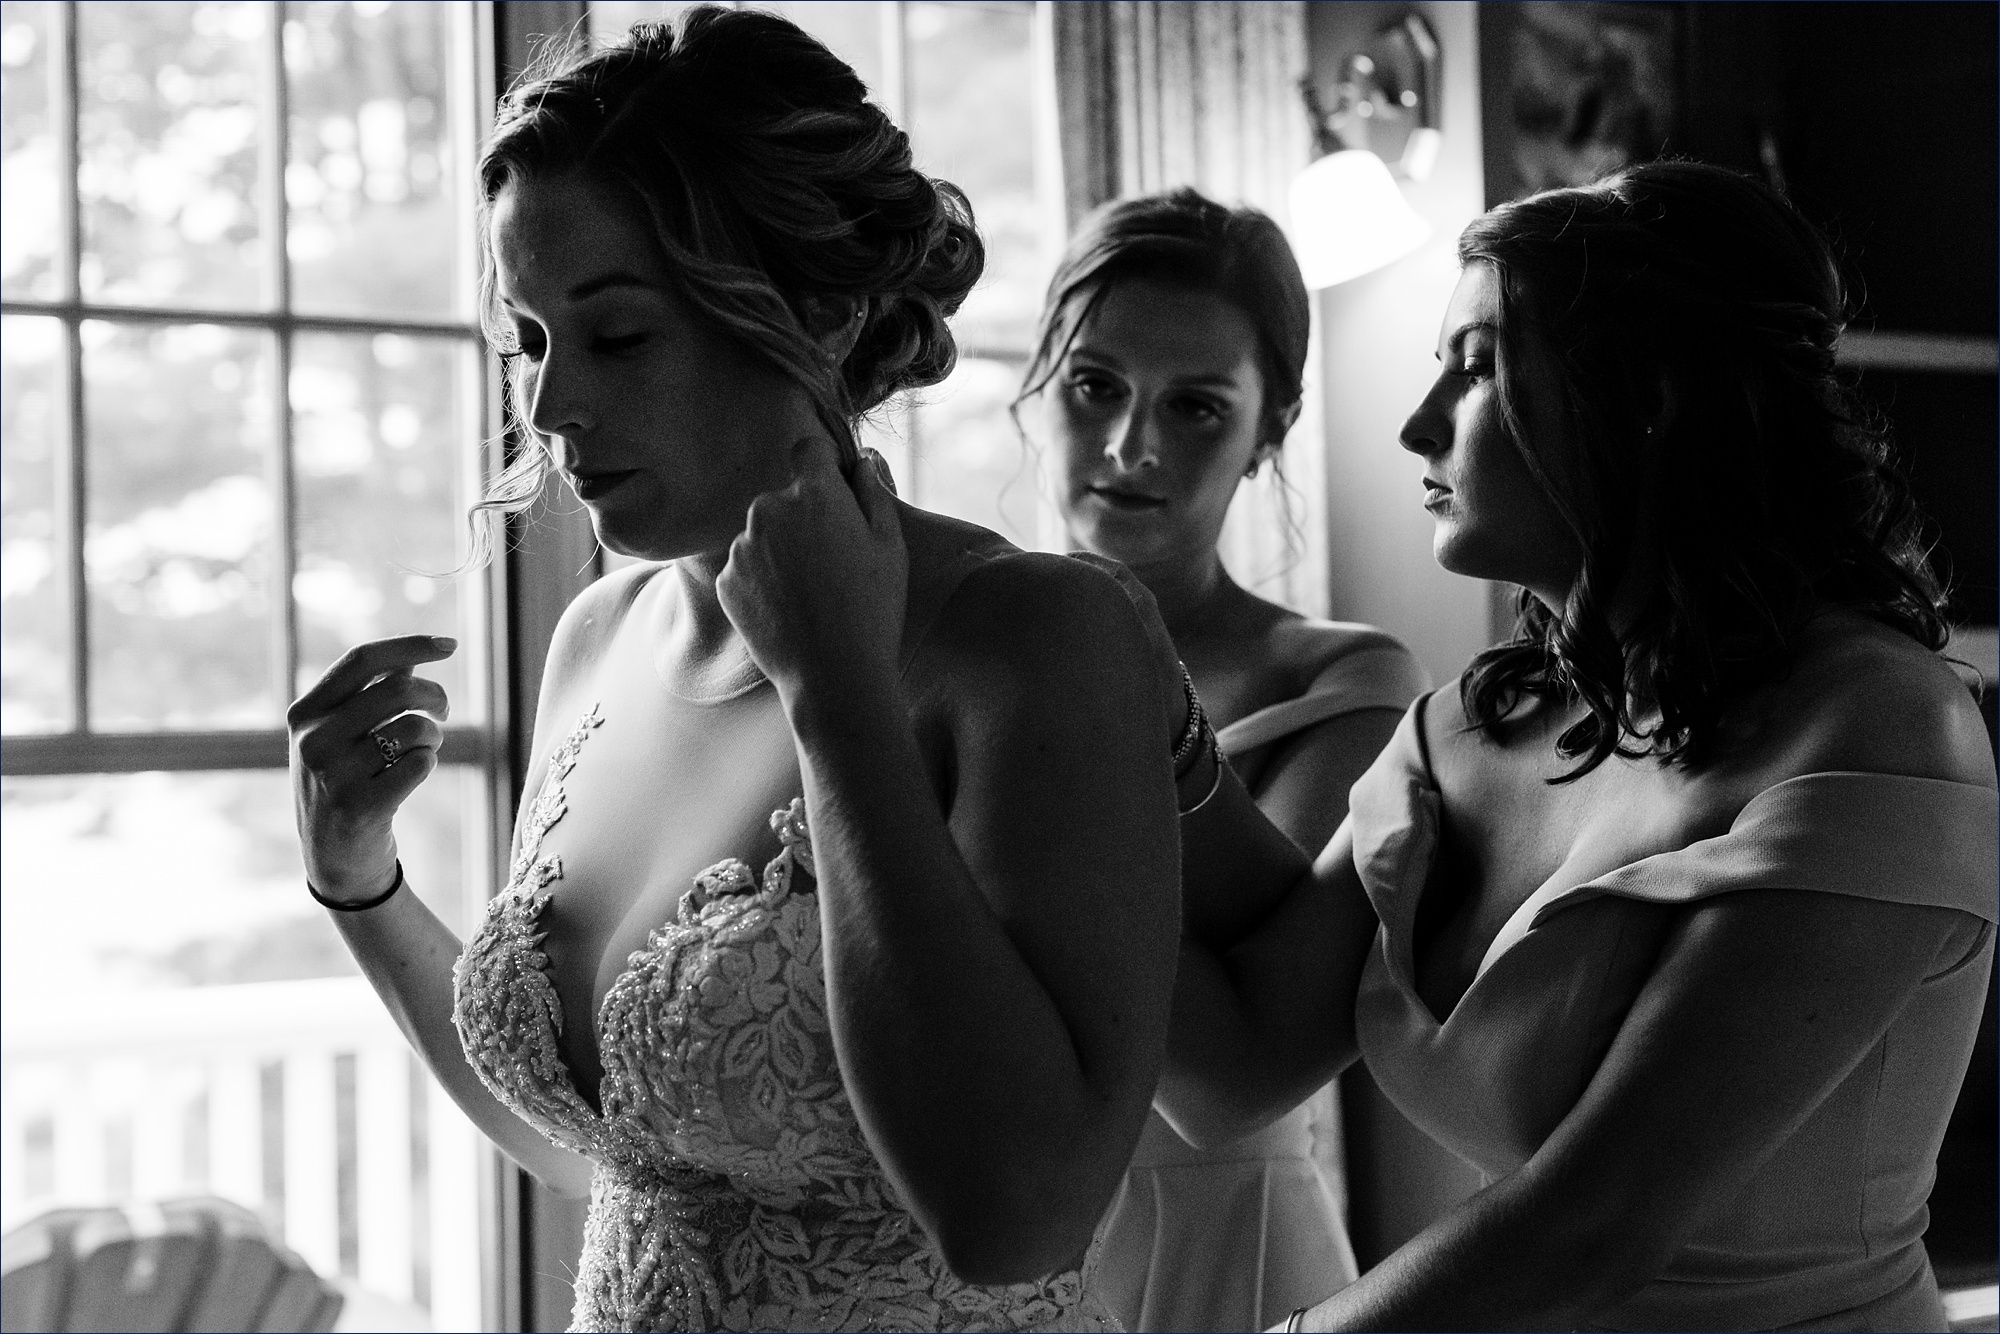 The bride gets some help from her bridesmaids as she puts on her dress